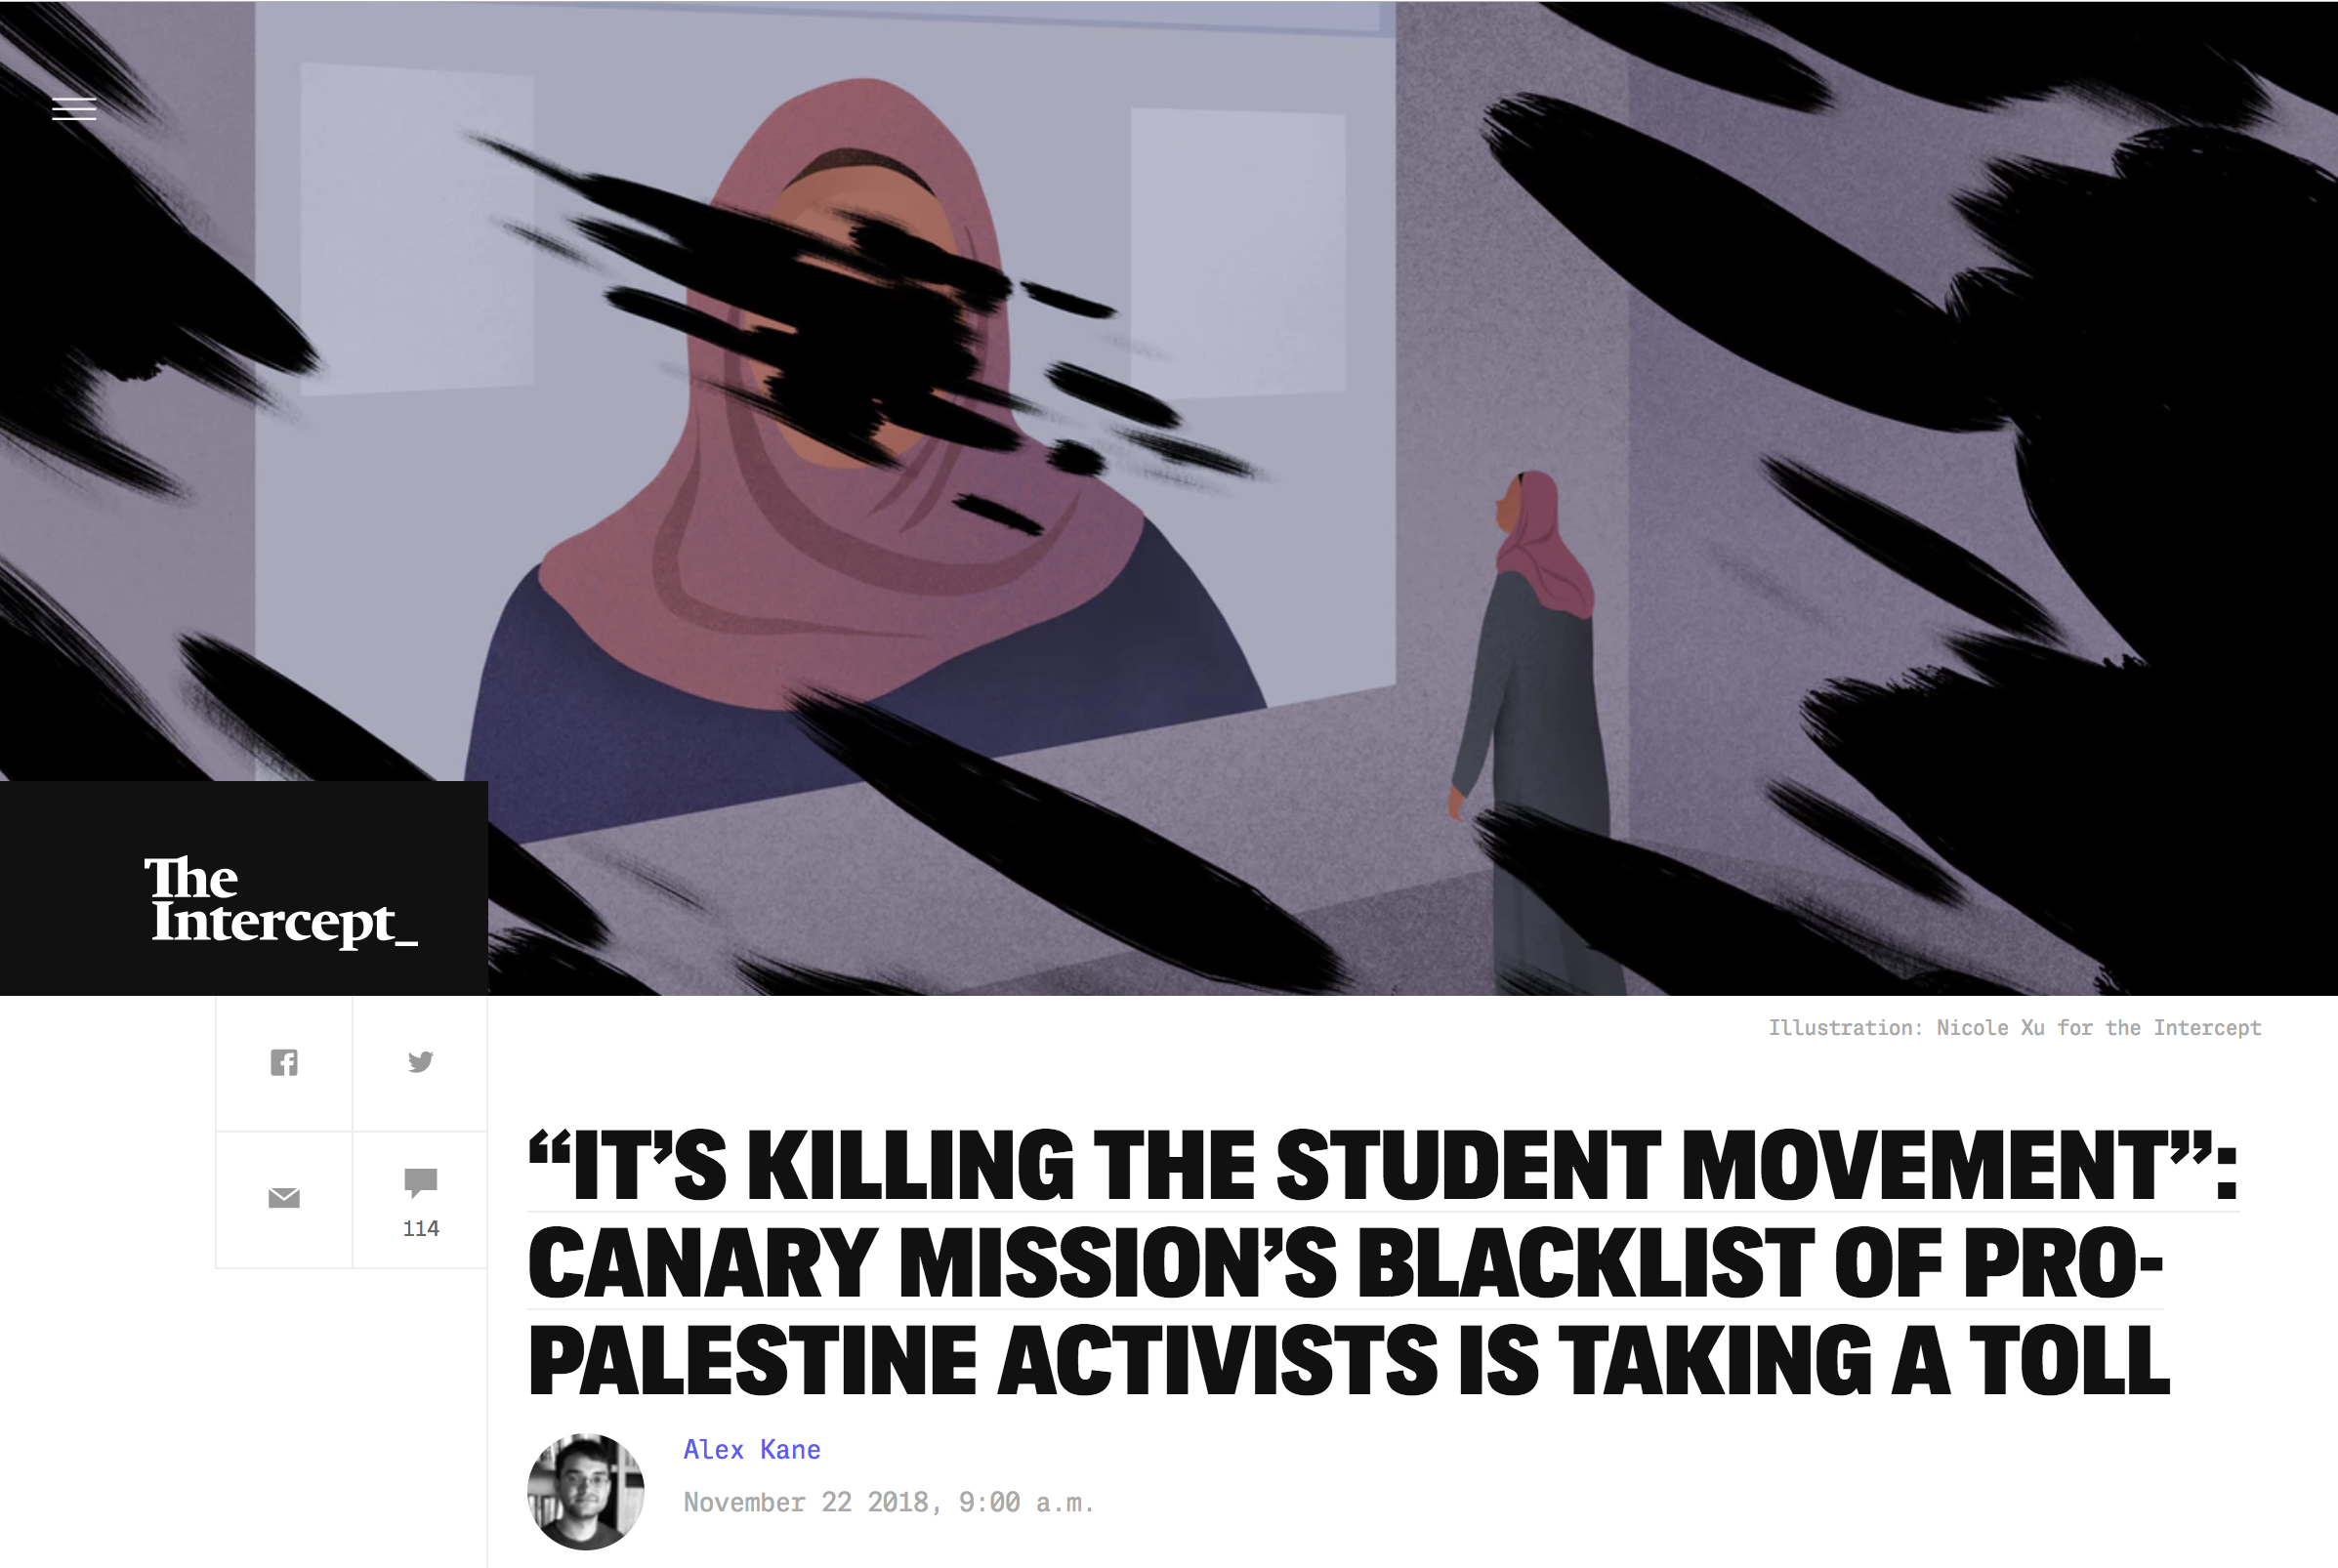  Illustration:  Nicole Xu   Art Direction: Ariel Zambelich  Story:  “It’s Killing The Student Movement”: Canary Mission’s Blacklist of Pro-Palestine Activists Is Taking A Toll  